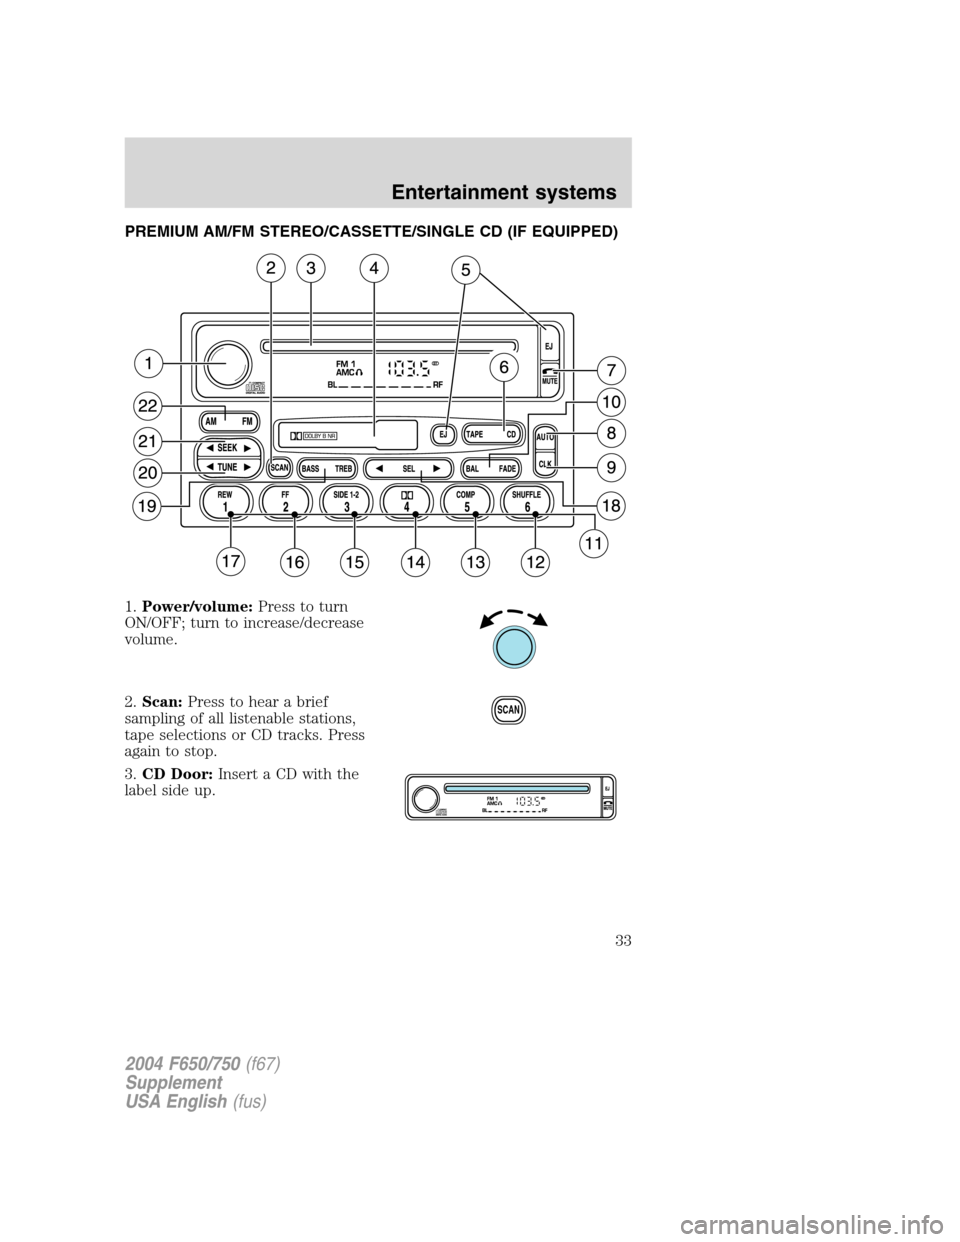 FORD F750 2004 11.G Owners Guide PREMIUM AM/FM STEREO/CASSETTE/SINGLE CD (IF EQUIPPED)
1.Power/volume:Press to turn
ON/OFF; turn to increase/decrease
volume.
2.Scan:Press to hear a brief
sampling of all listenable stations,
tape sele